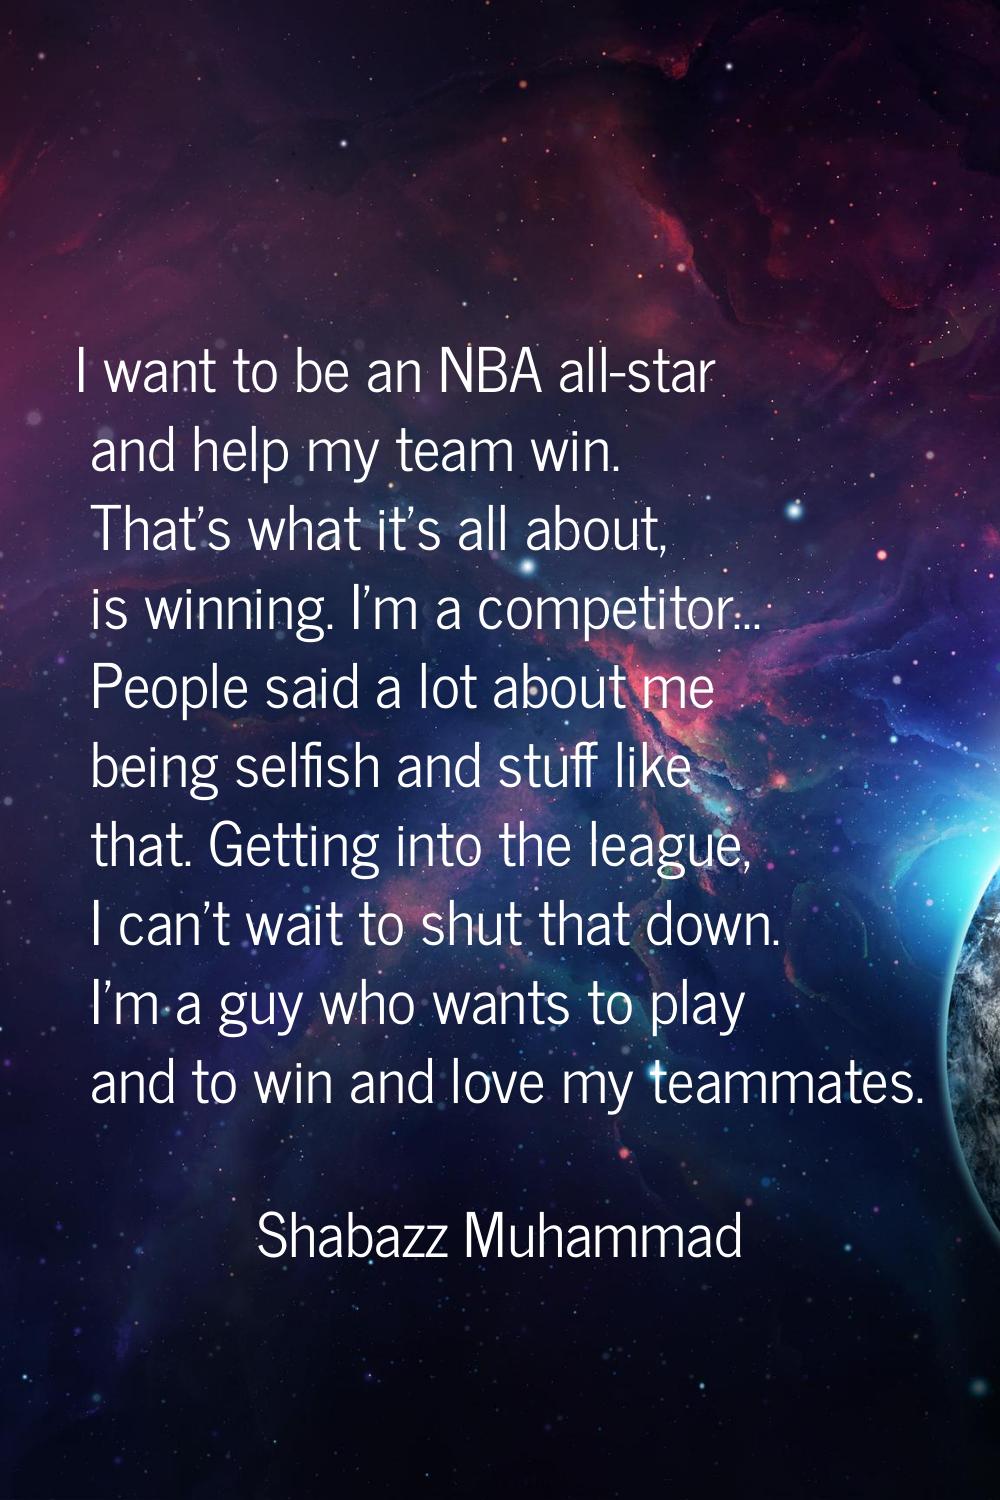 I want to be an NBA all-star and help my team win. That's what it's all about, is winning. I'm a co